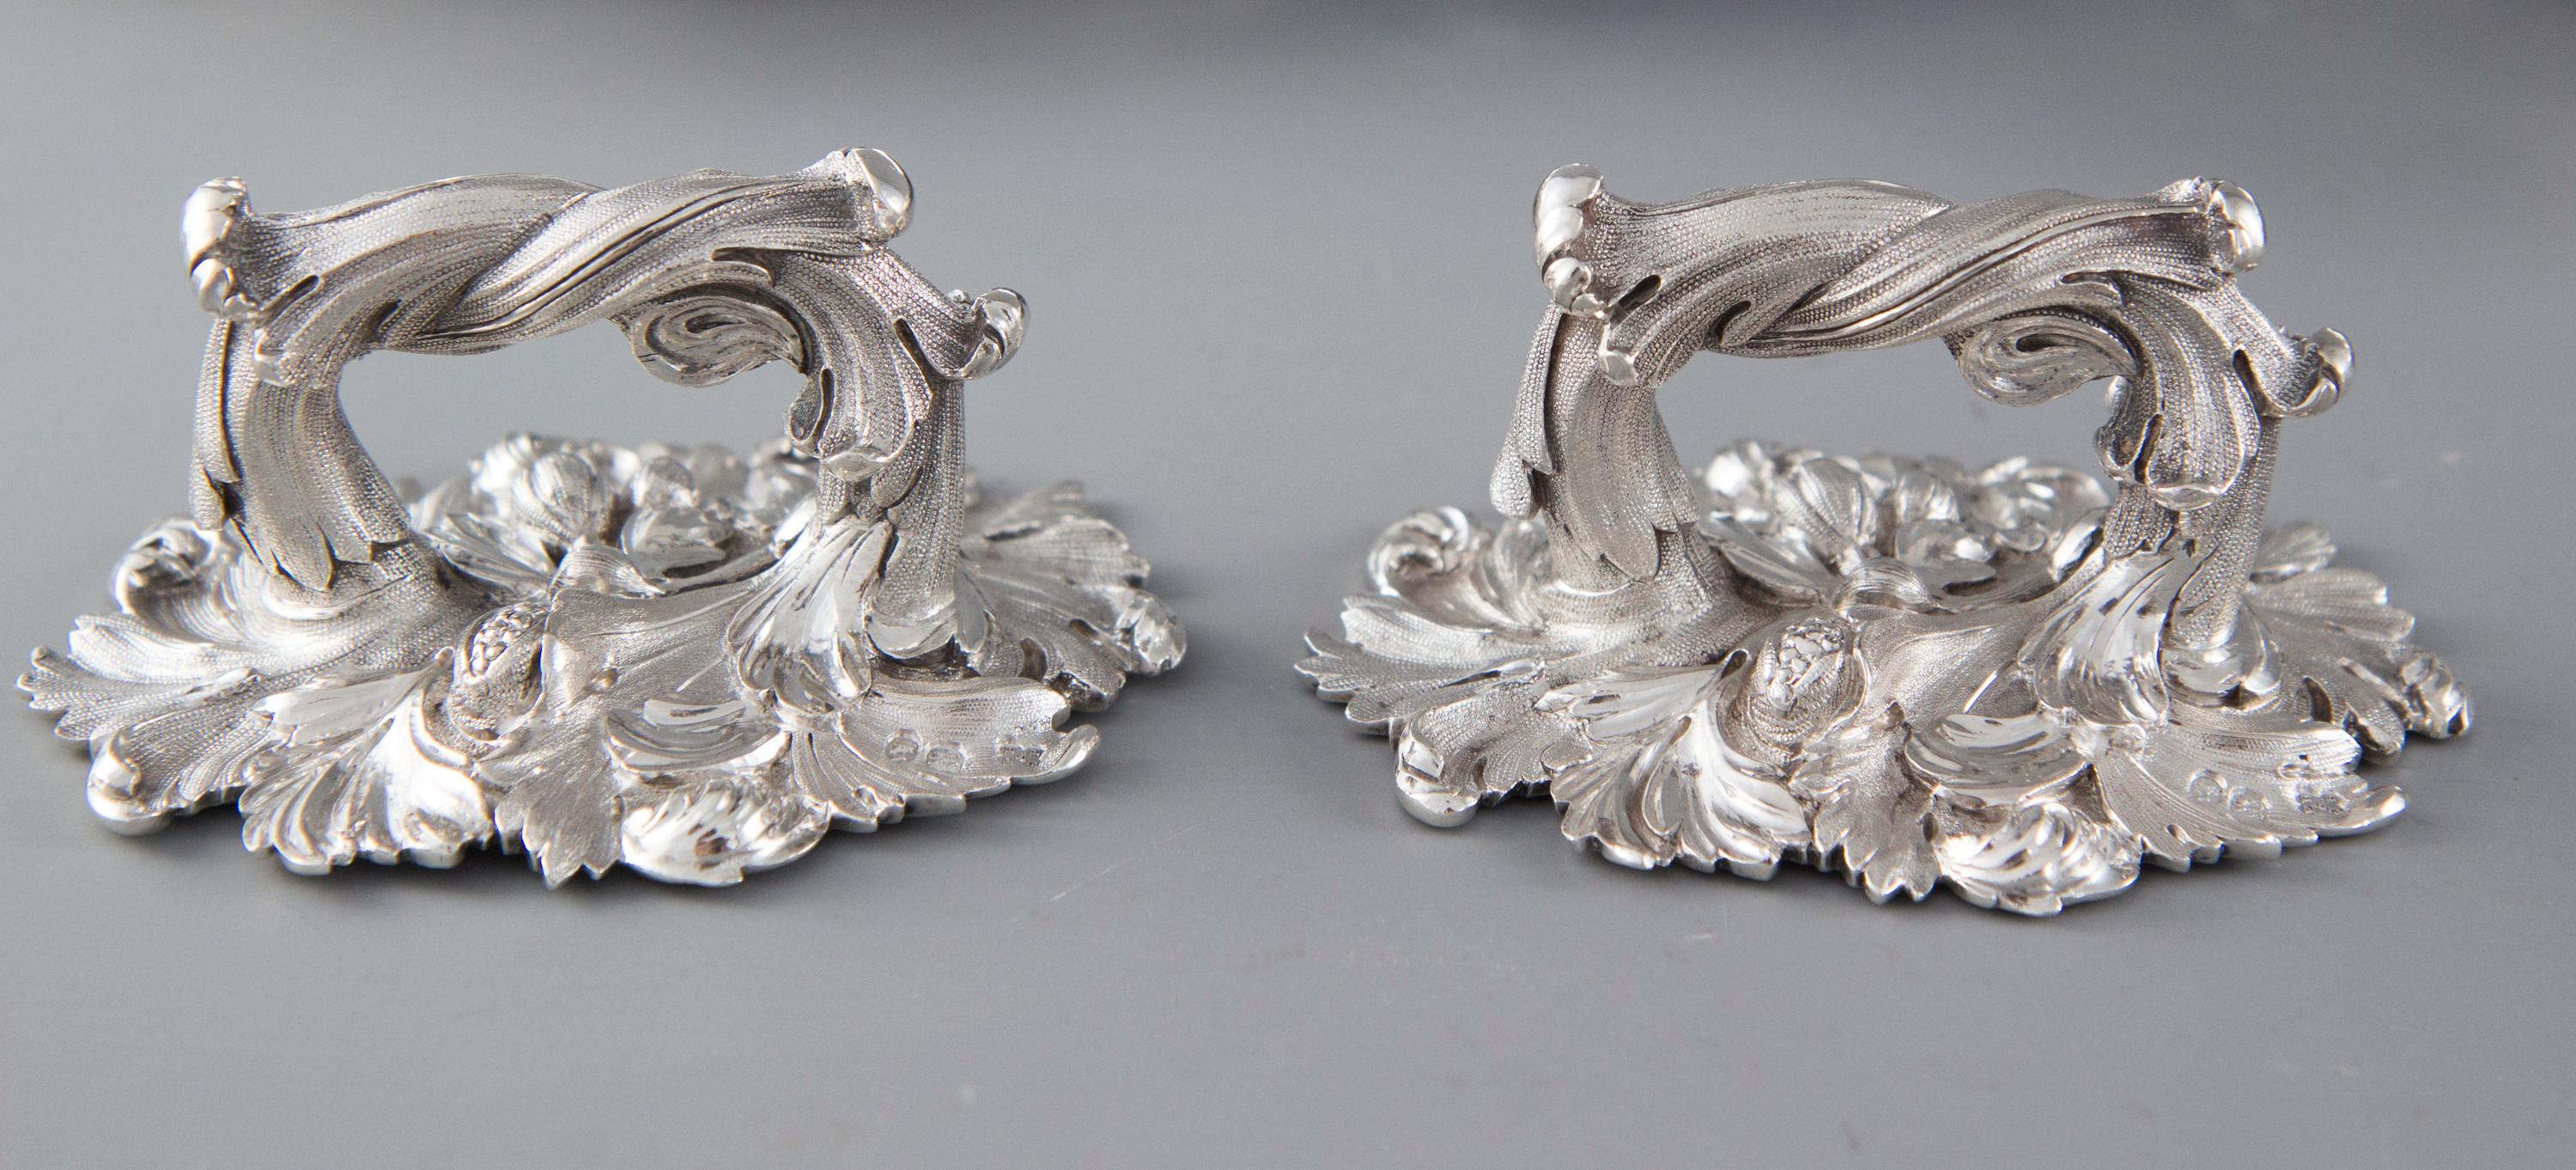 Pair of Victorian Silver Entree or Serving Dishes, Barnards, London, 1855 12